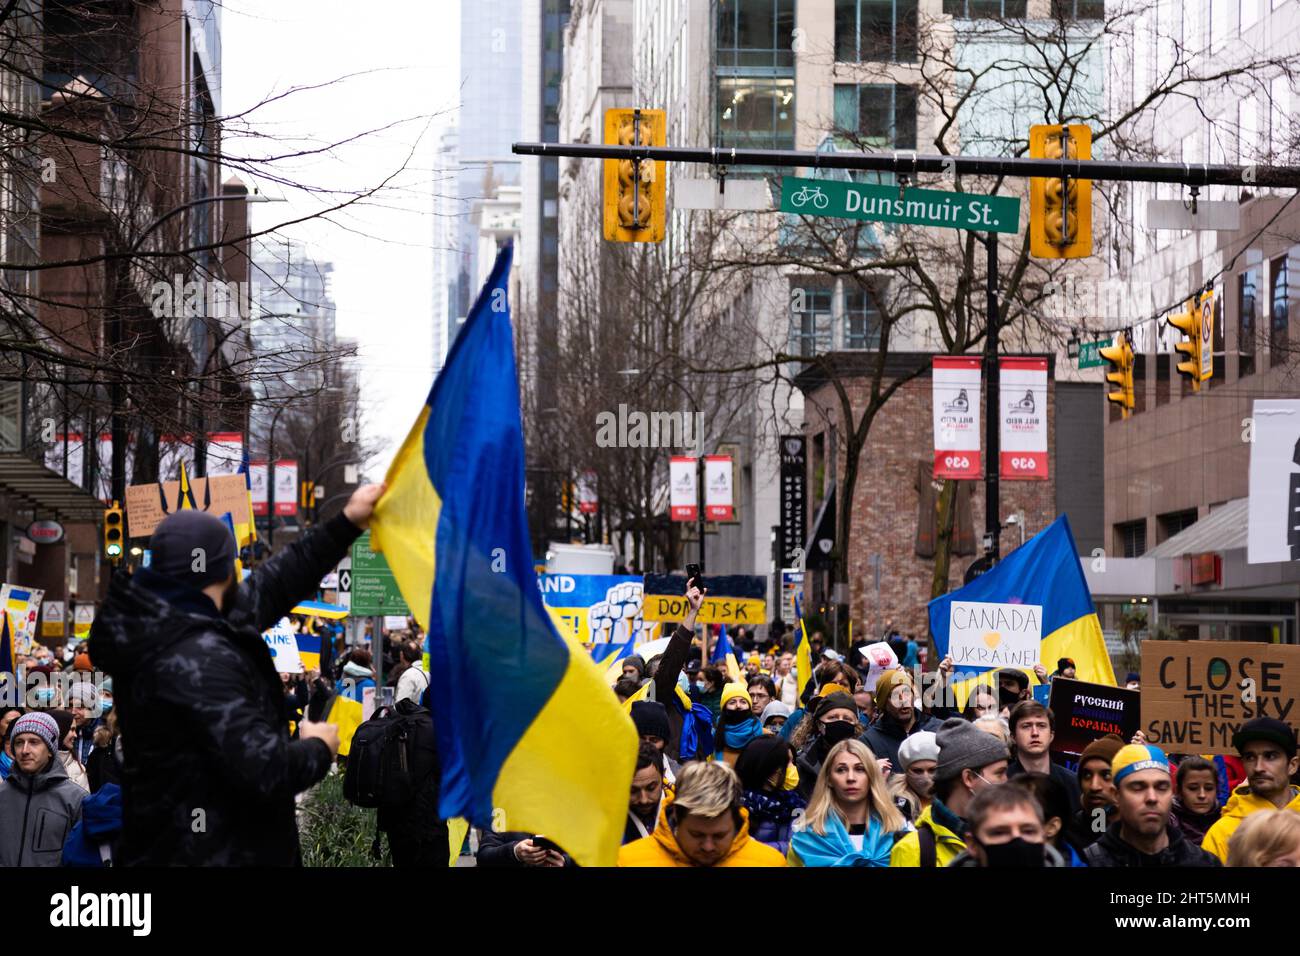 DOWNTOWN VANCOUVER, BC, CANADA - FEB 26, 2022: Protest rally against Vladamir Putin and the Russian invasion of Ukraine that was attended by thousand Stock Photo